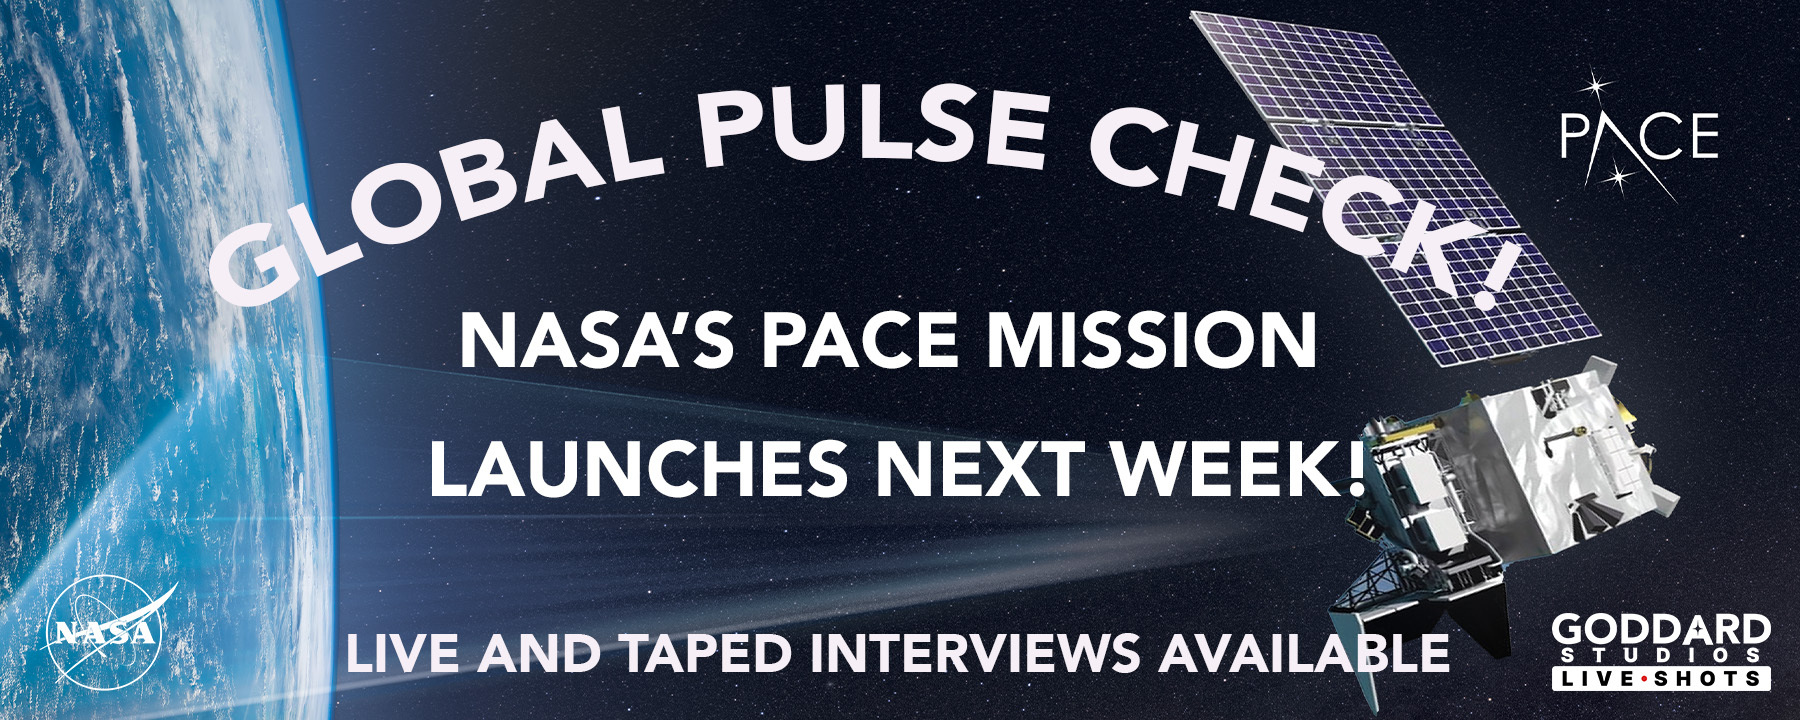 Click here for more information about the PACE mission.Associated cut b-roll for the live shots will be added by 5 p.m. EST on Friday, Feb 2